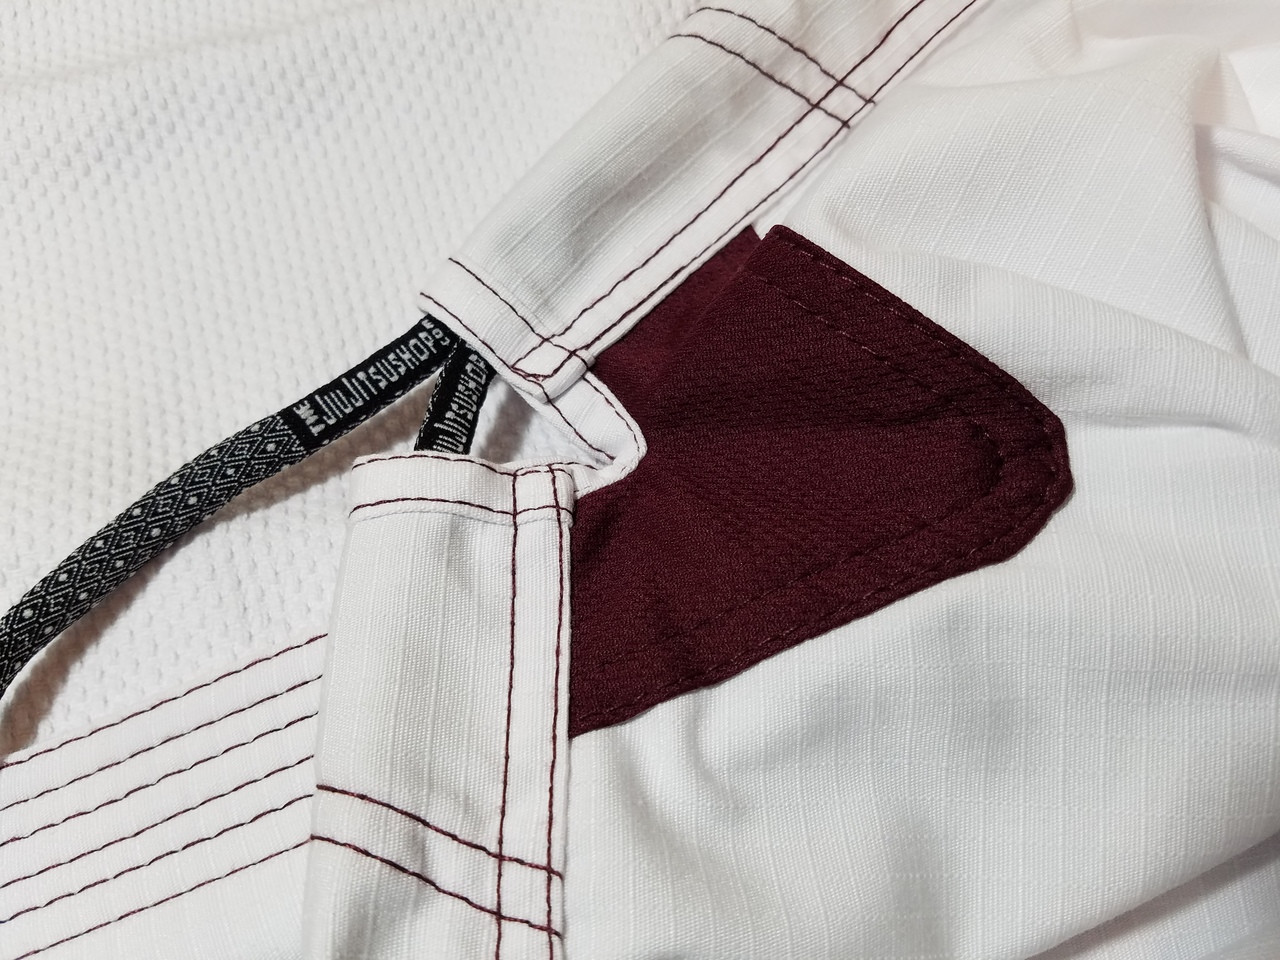 The Jiu Jitsu Shop Minimalist White with Burgandy accents.  Specifically cut for women.  Available at www.thejiujitsushop.com

Enjoy Free Shipping today! 